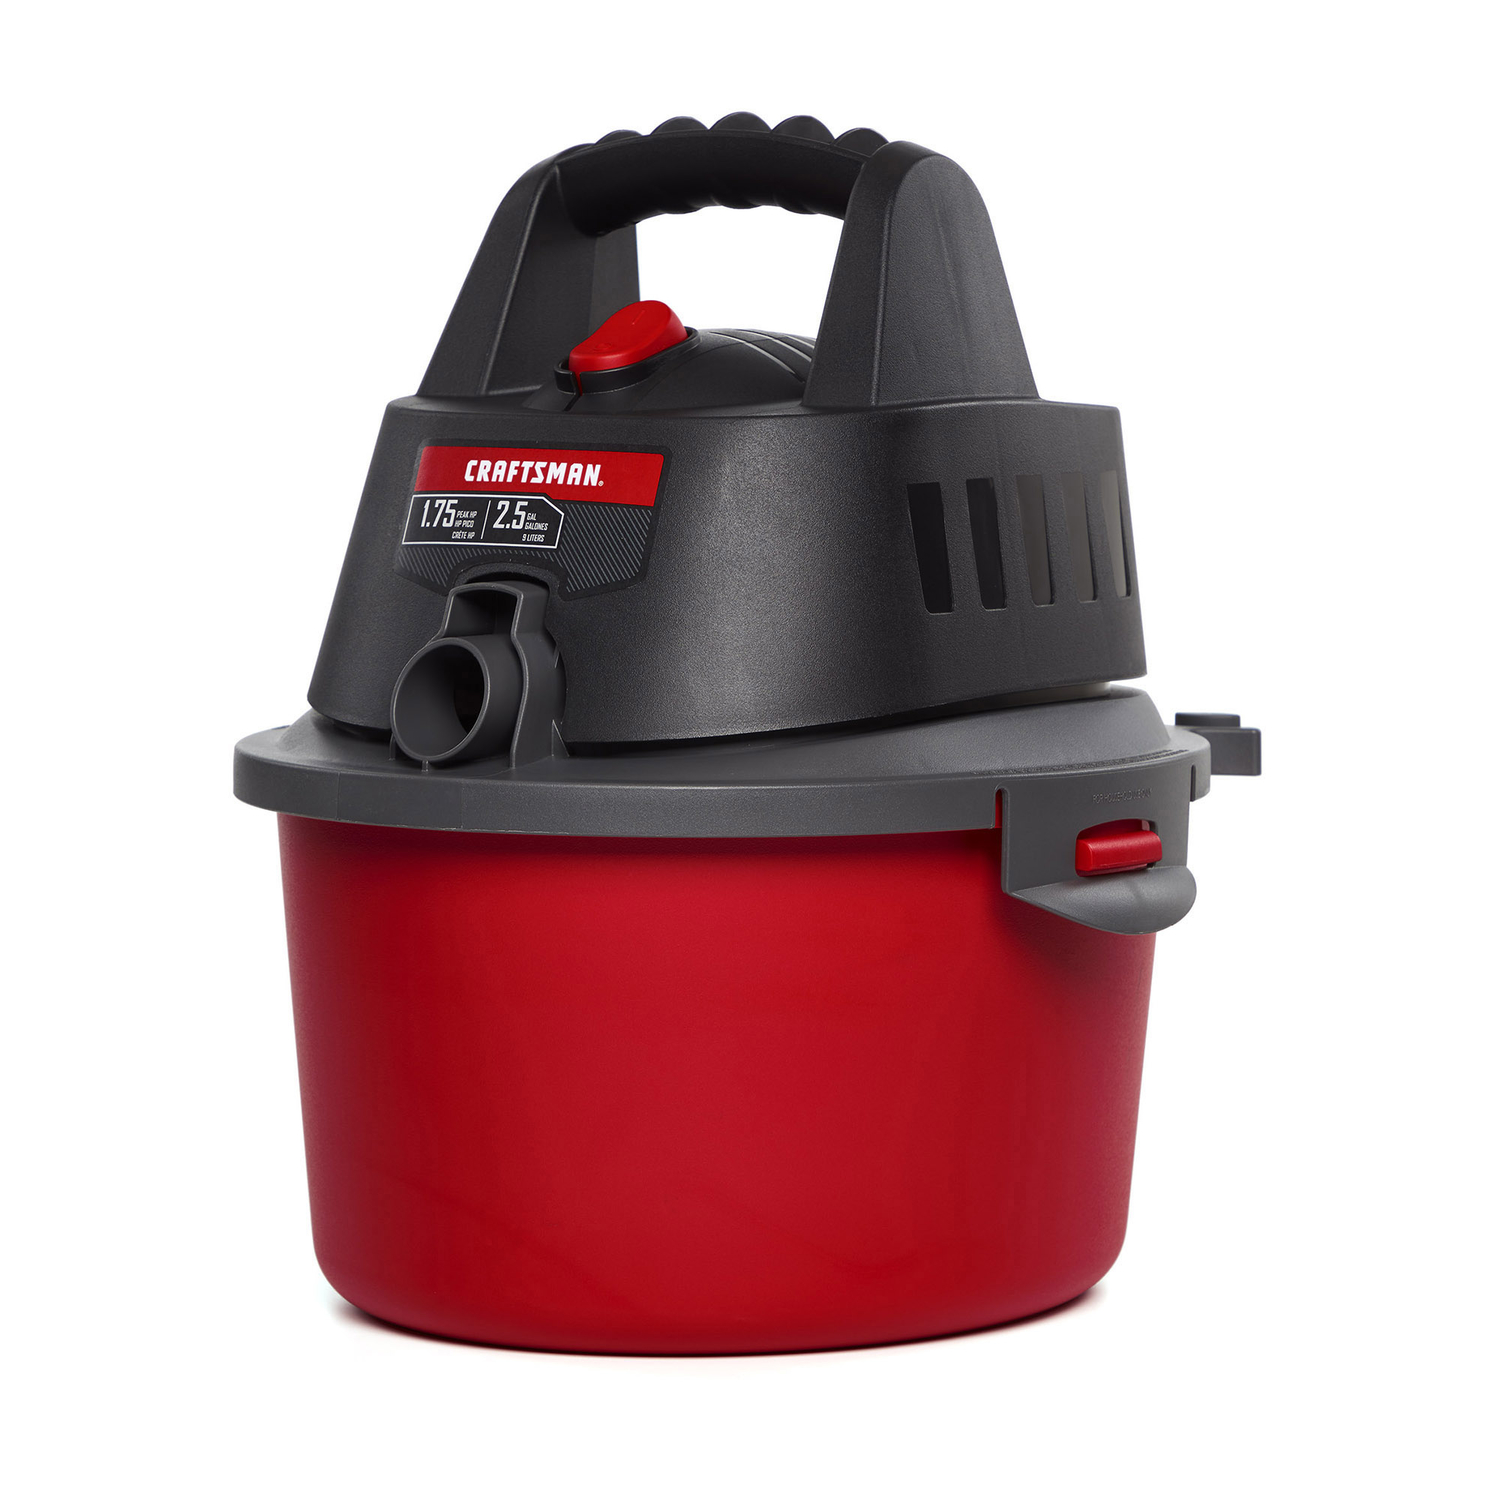 Craftsman 2.5 gal. Corded Wet/Dry Vacuum 4 amps 120 volt 1.75 hp Red 7.9 lb.